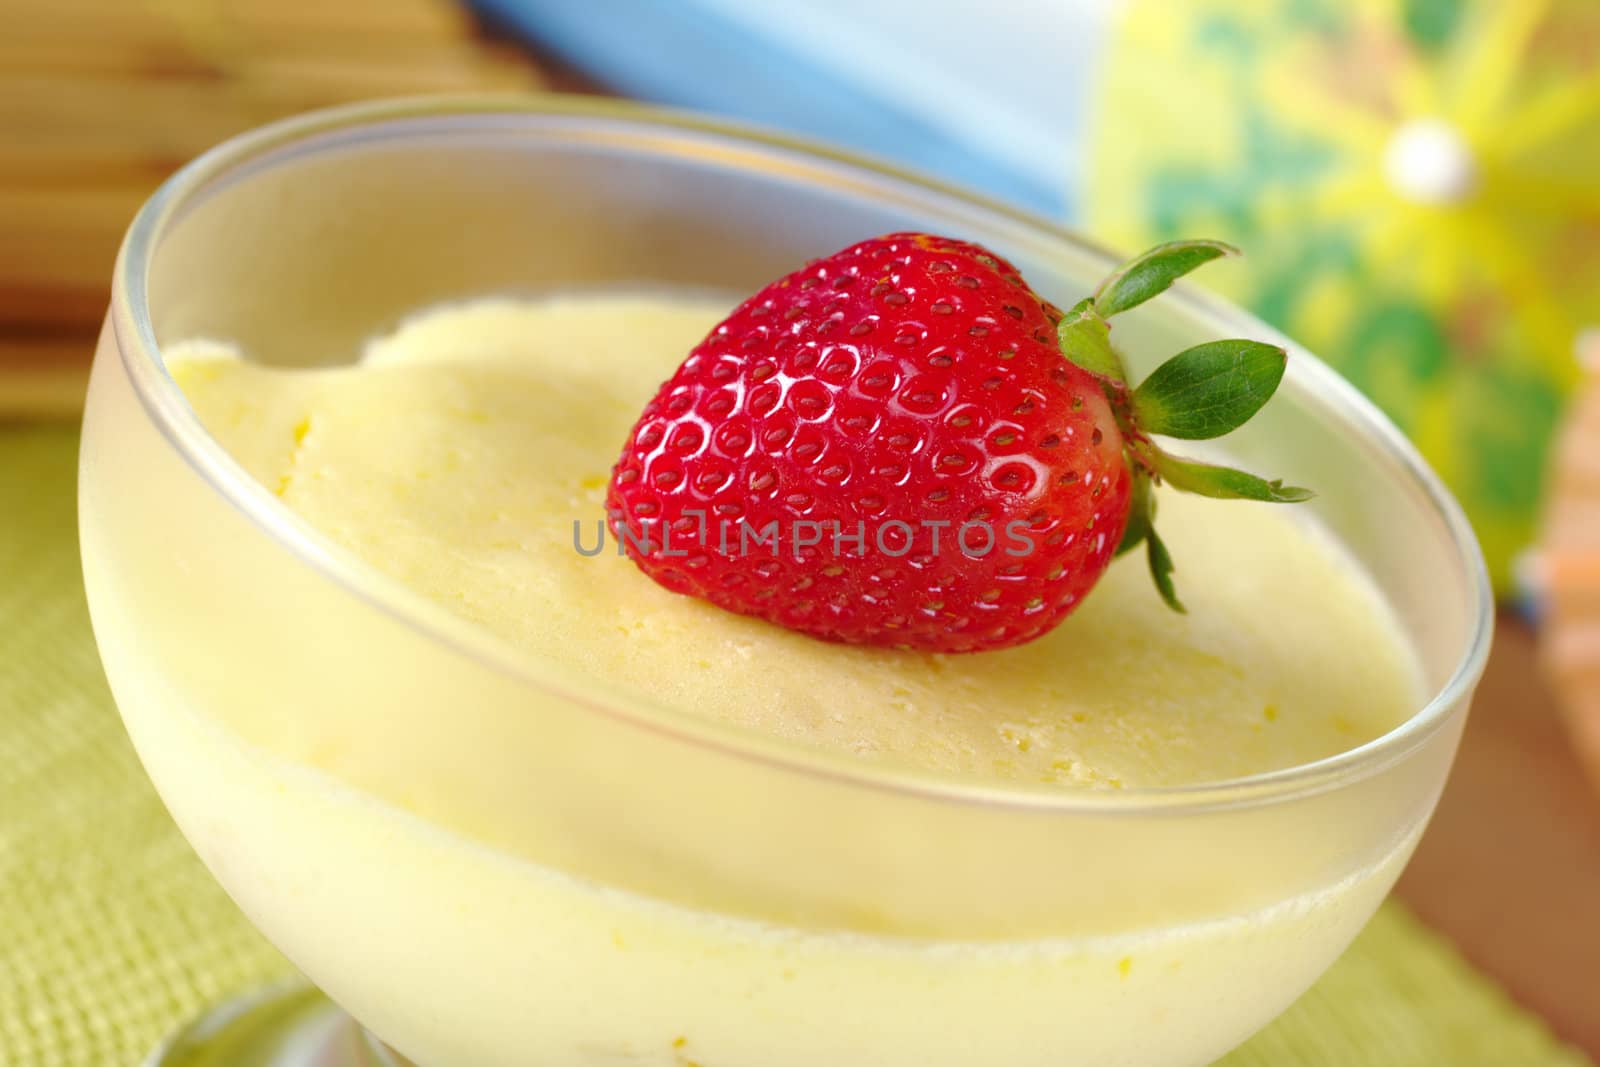 Fresh strawberry on cream cheese dessert in a glass bowl (Selective Focus, Focus on the front of the strawberry)